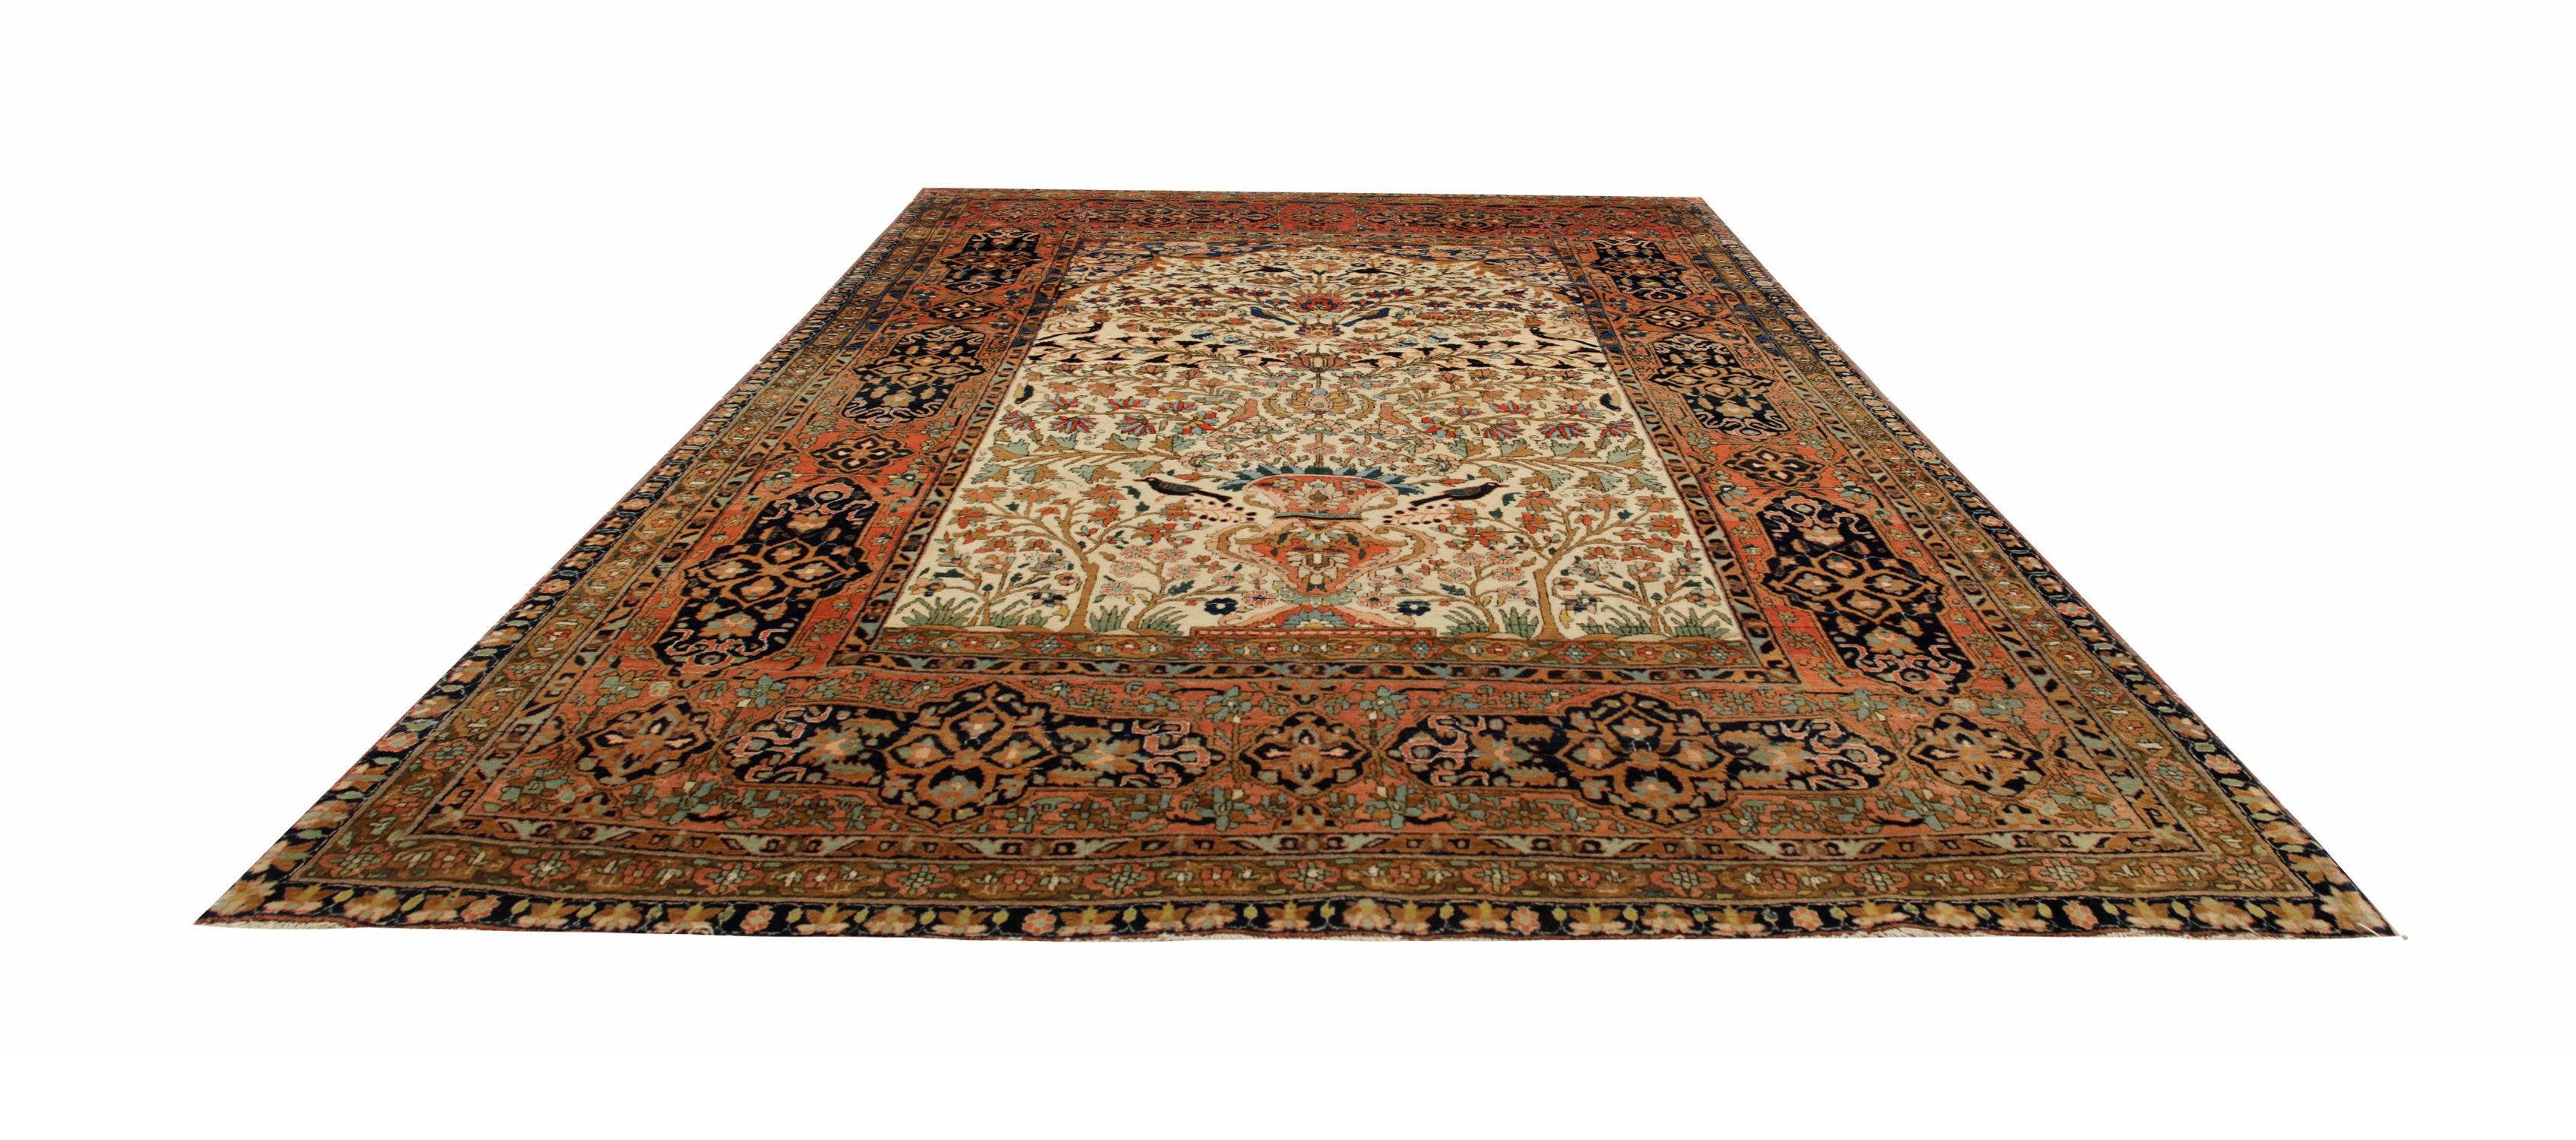 Caucasian Traditional Carpet Vase Rug Hand-Knotted Antique Living Room Rug For Sale